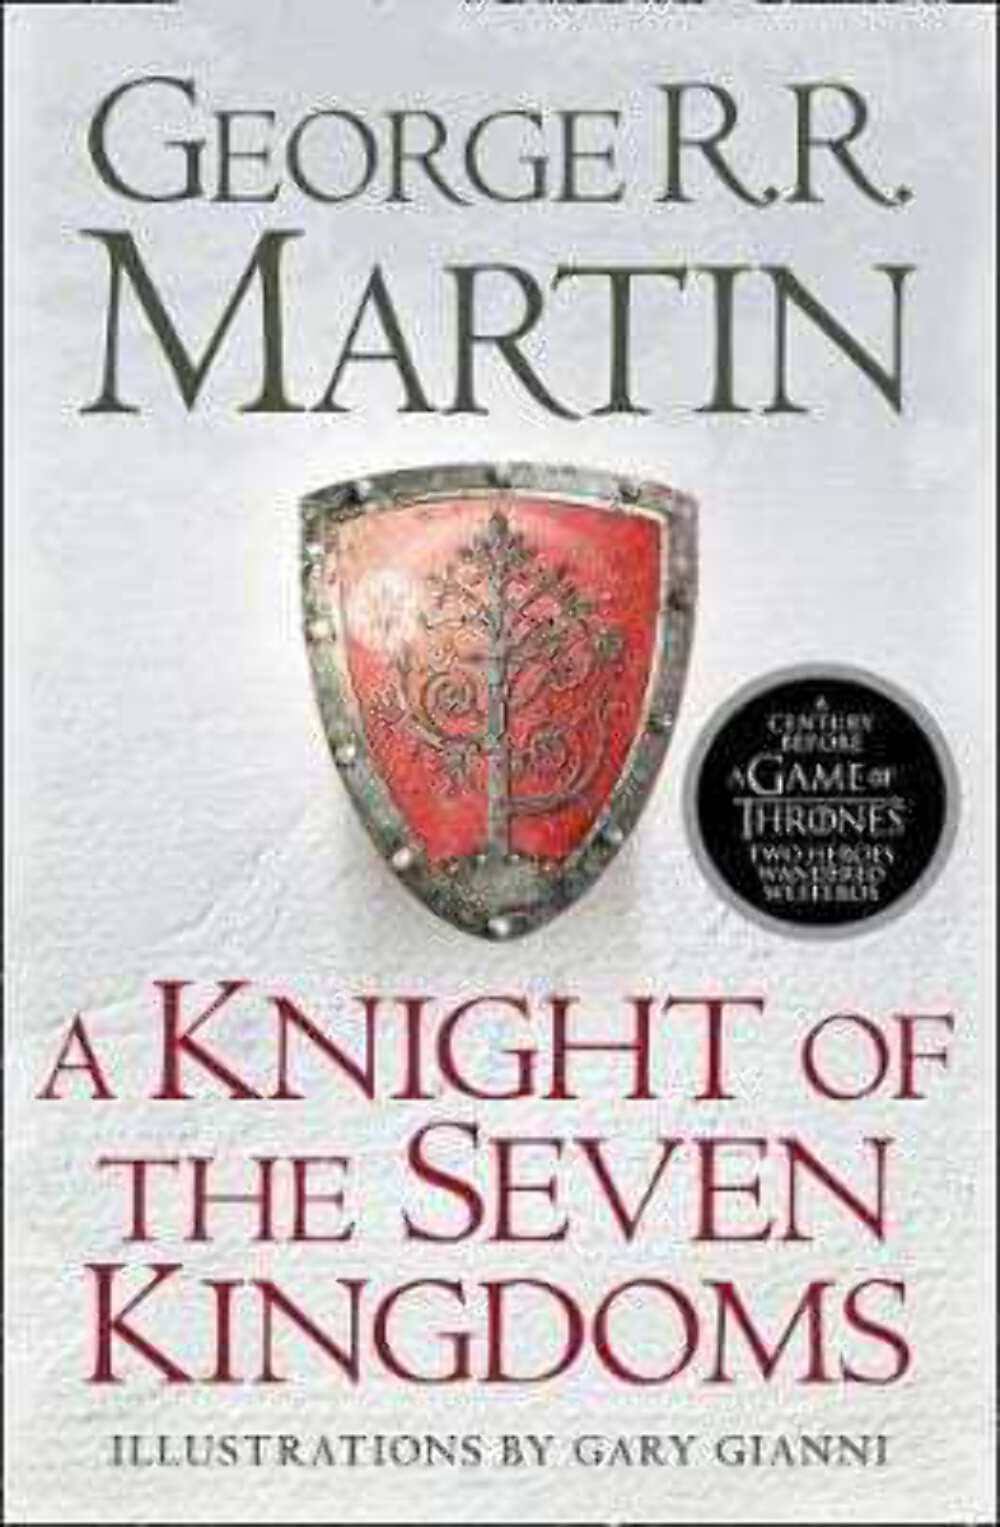 A Knight of the Seven Kingdoms [Book]